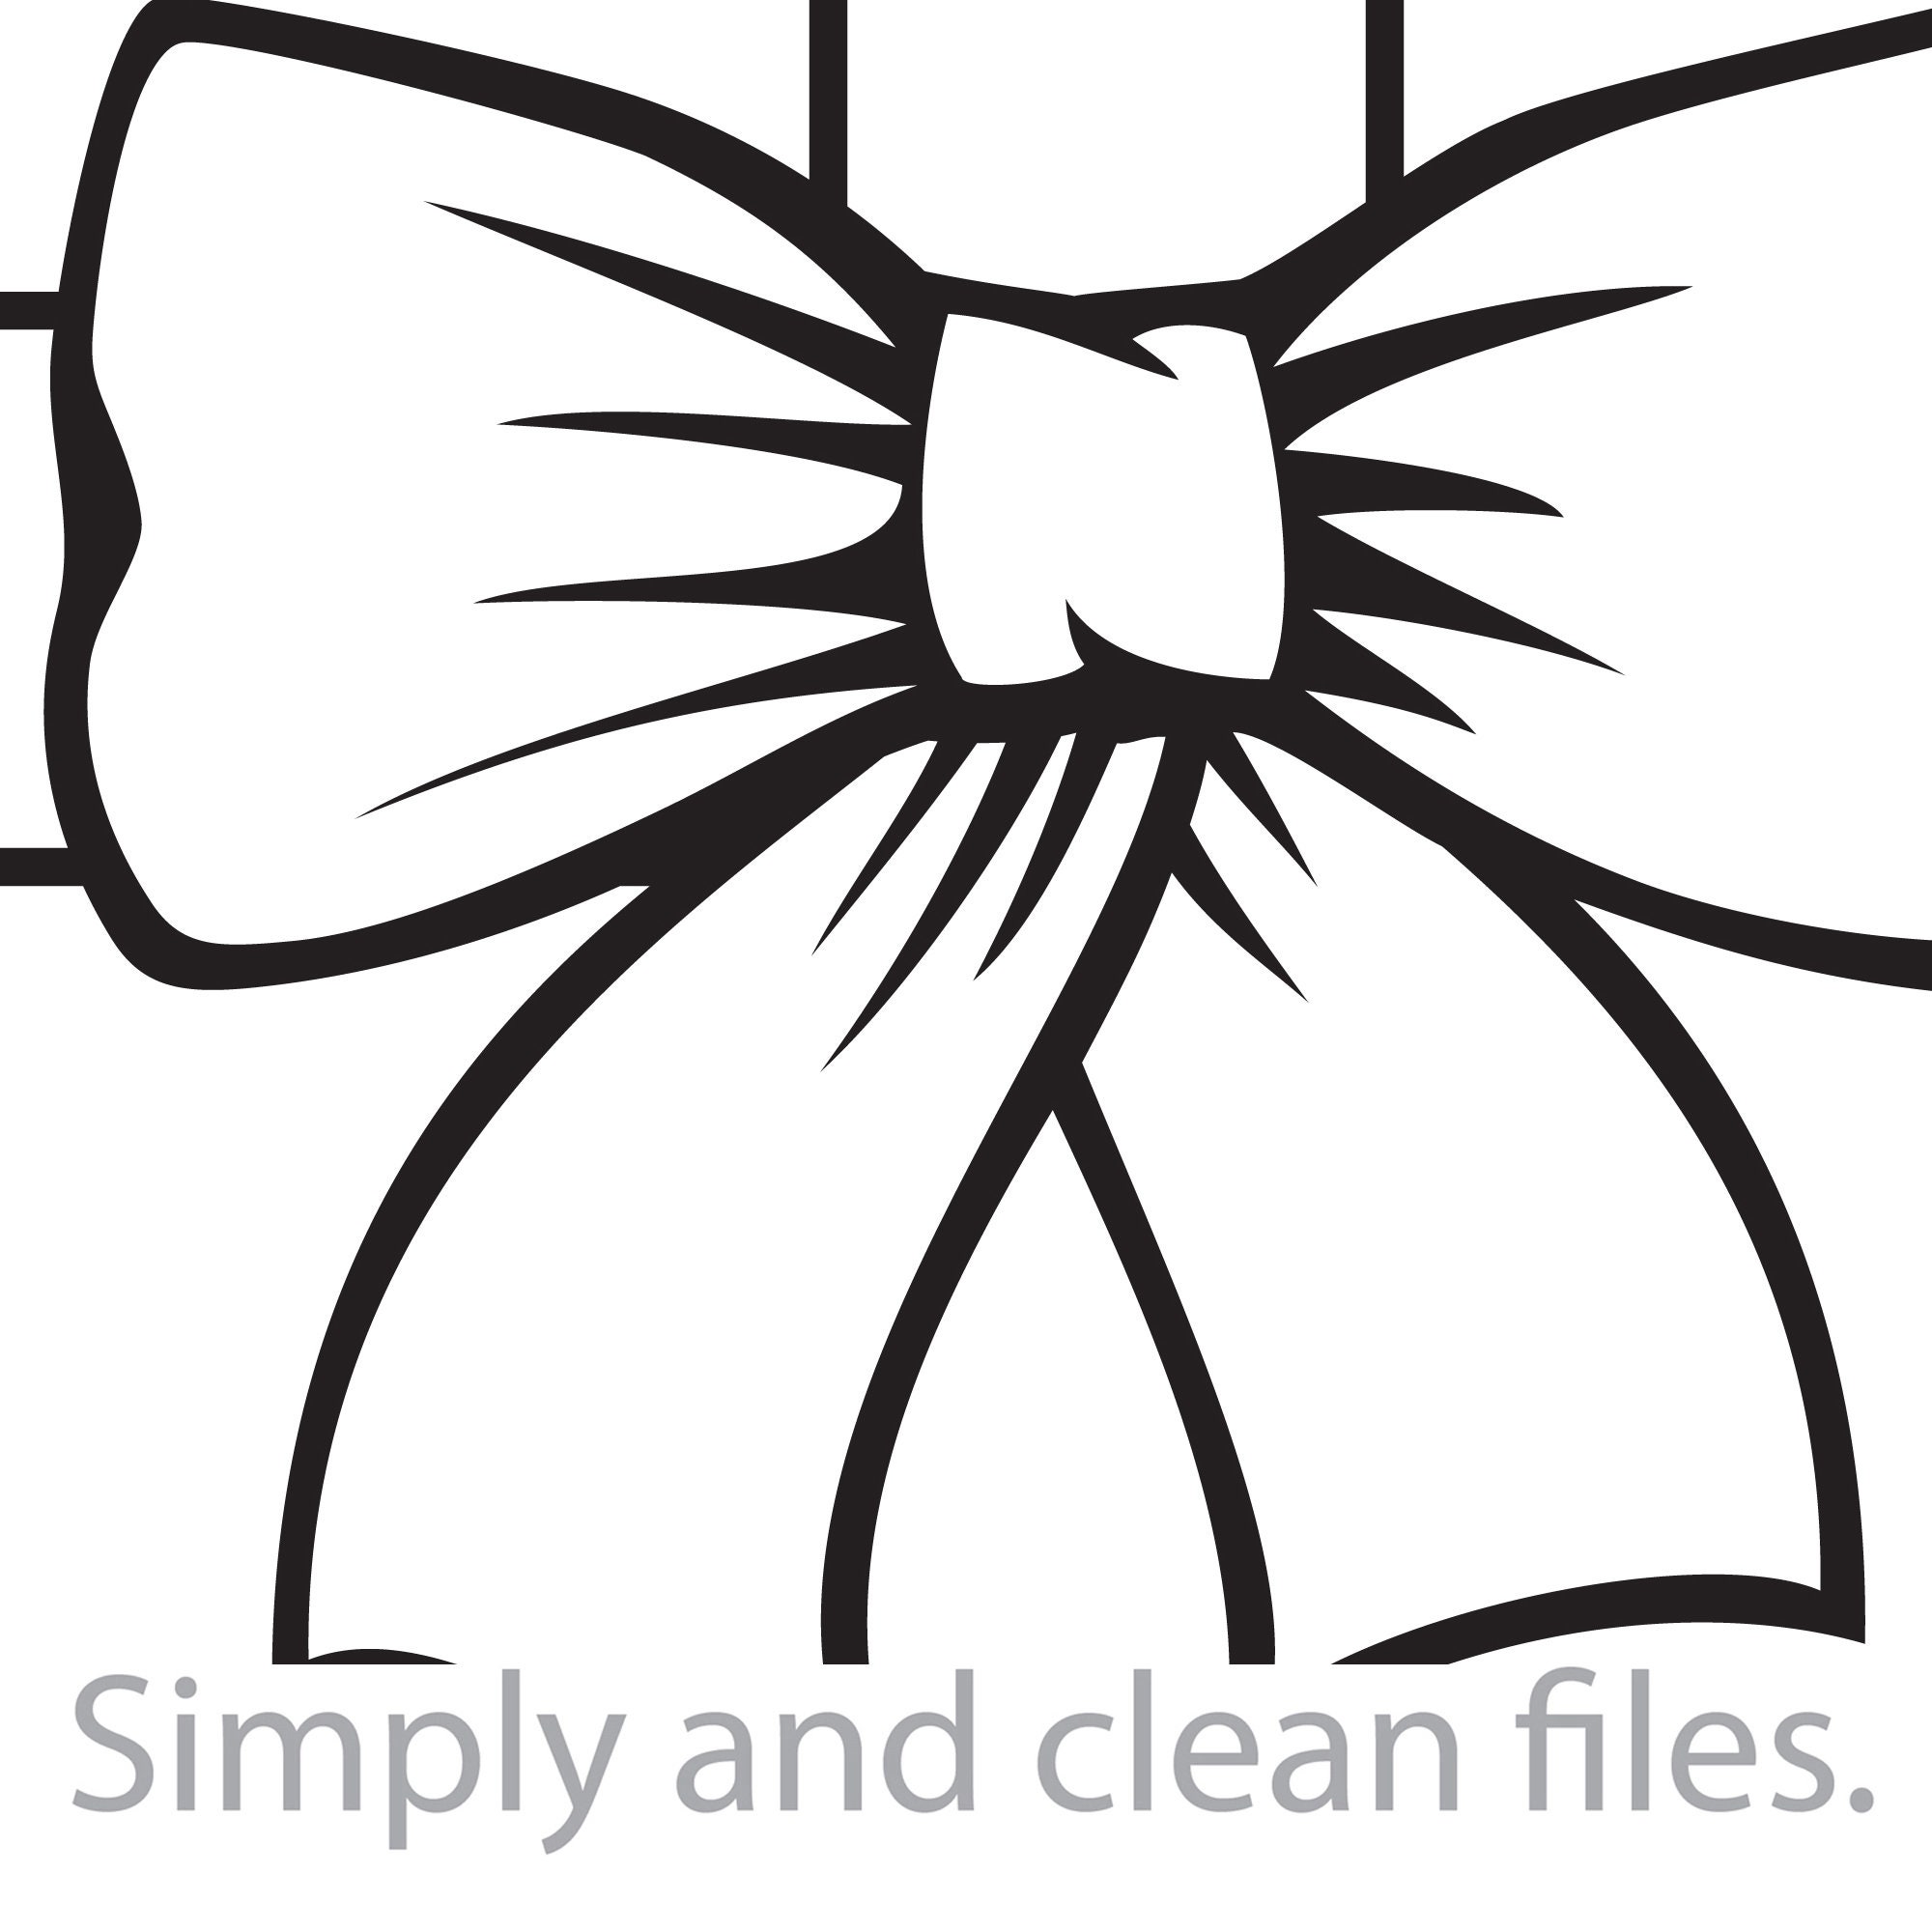 Ribbon Bow Sticker Clip Art PNG Graphic by idelotama · Creative